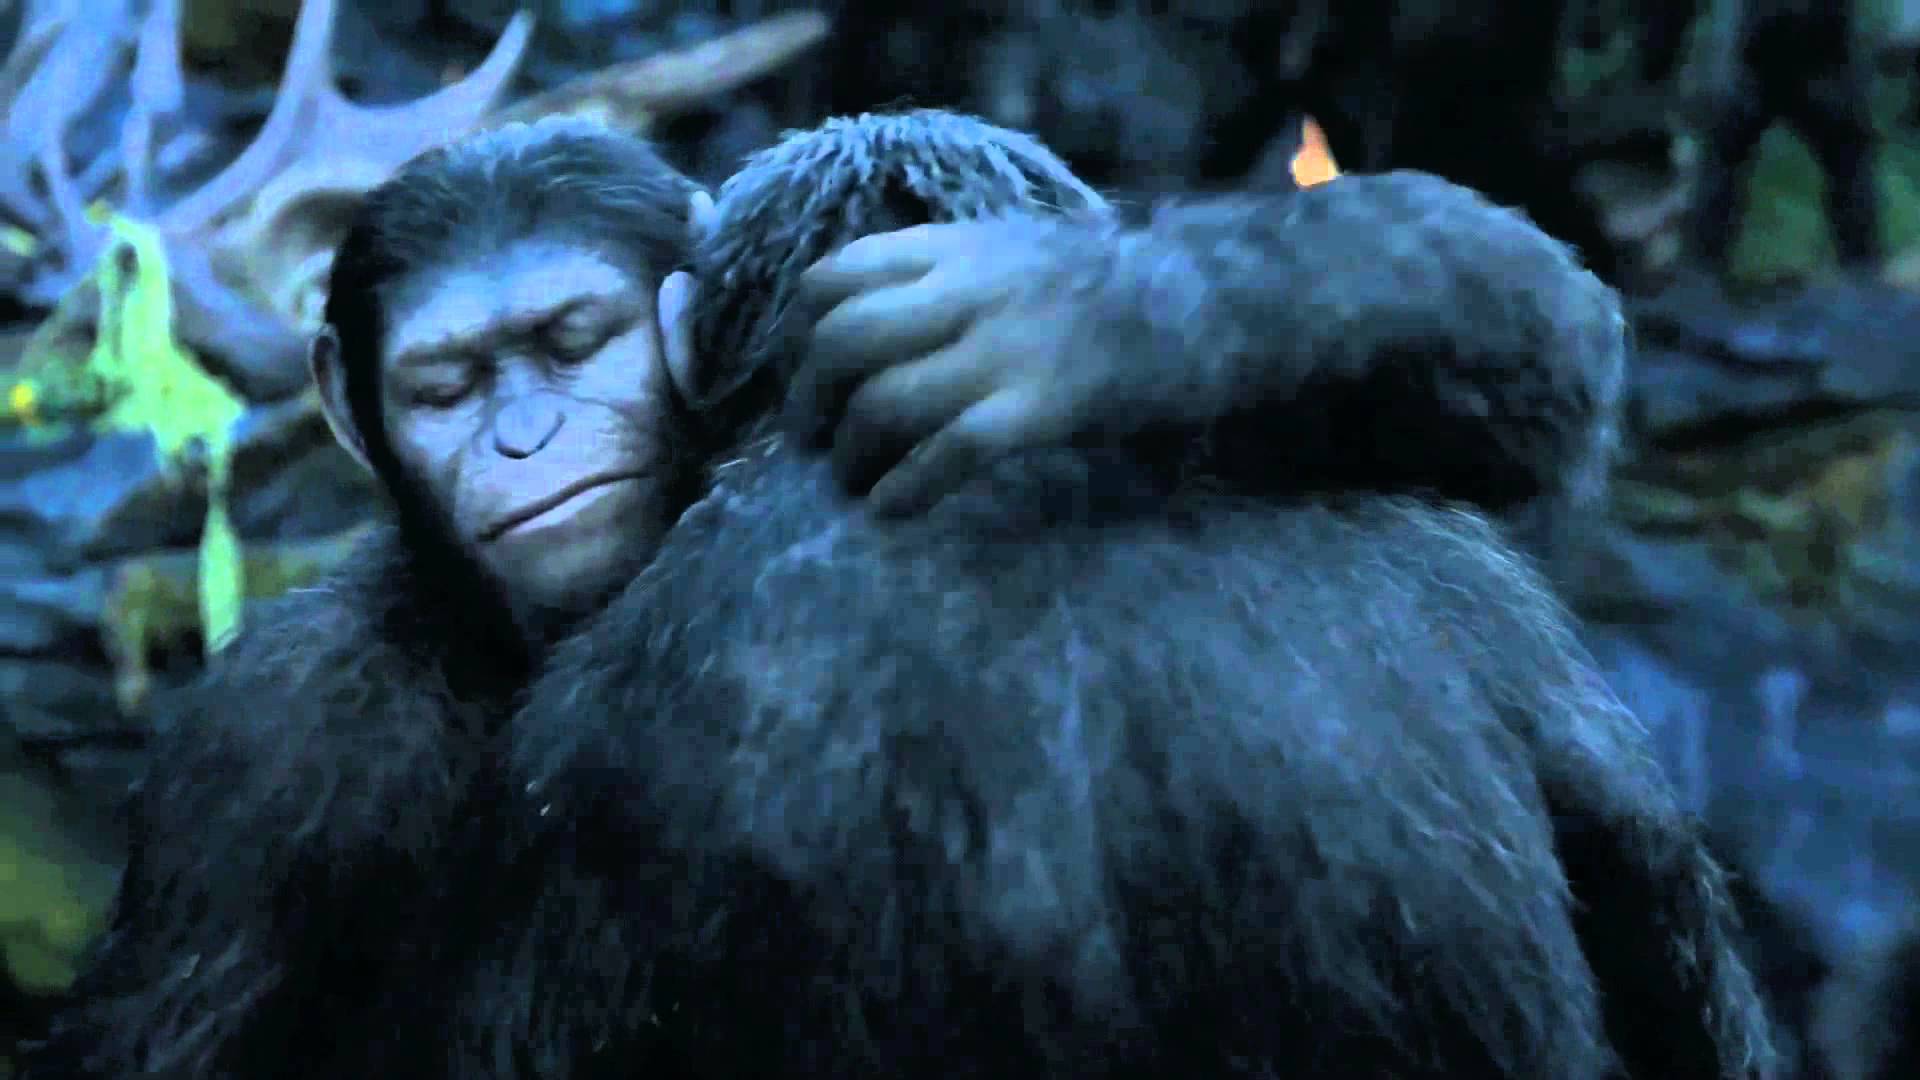 dawn of the planet of the apes koba vs caesar fight